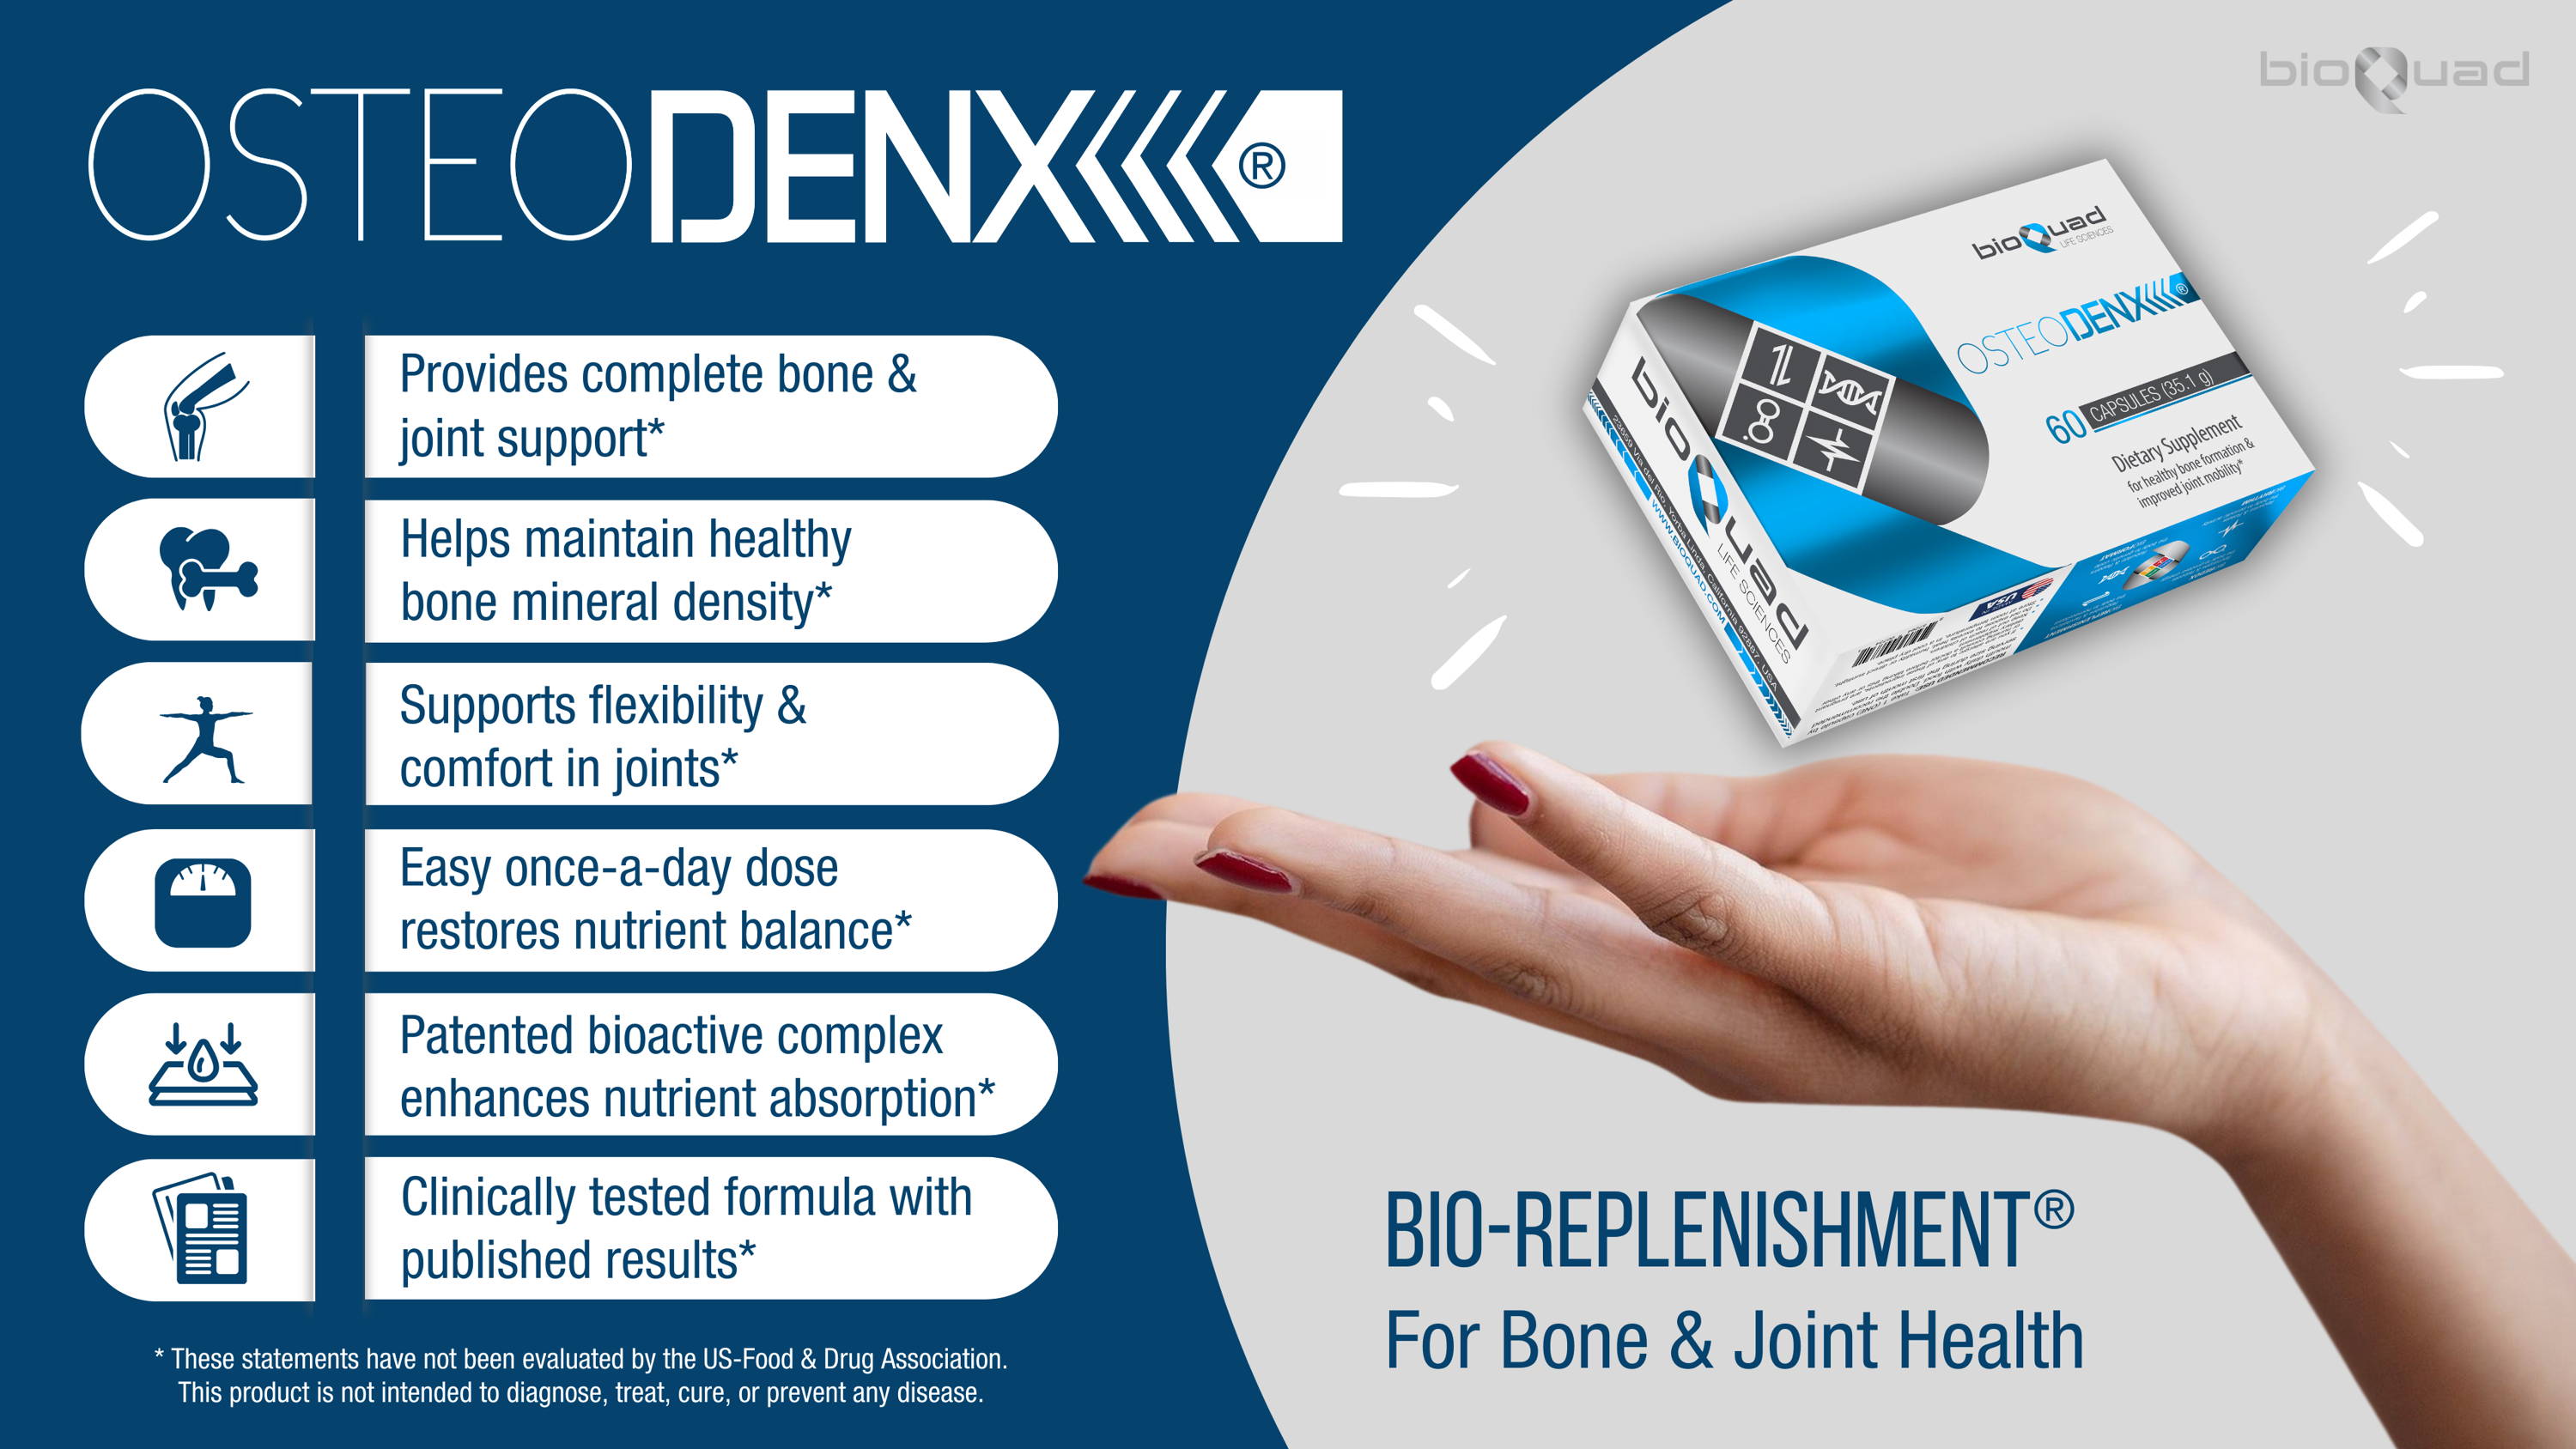 Promotional image for OsteoDenx, highlighting benefits such as complete bone and joint support, maintenance of bone density, improved joint flexibility and comfort, nutrient balance, and enhanced nutrient absorption, with an image of the OsteoDenx supplement box.